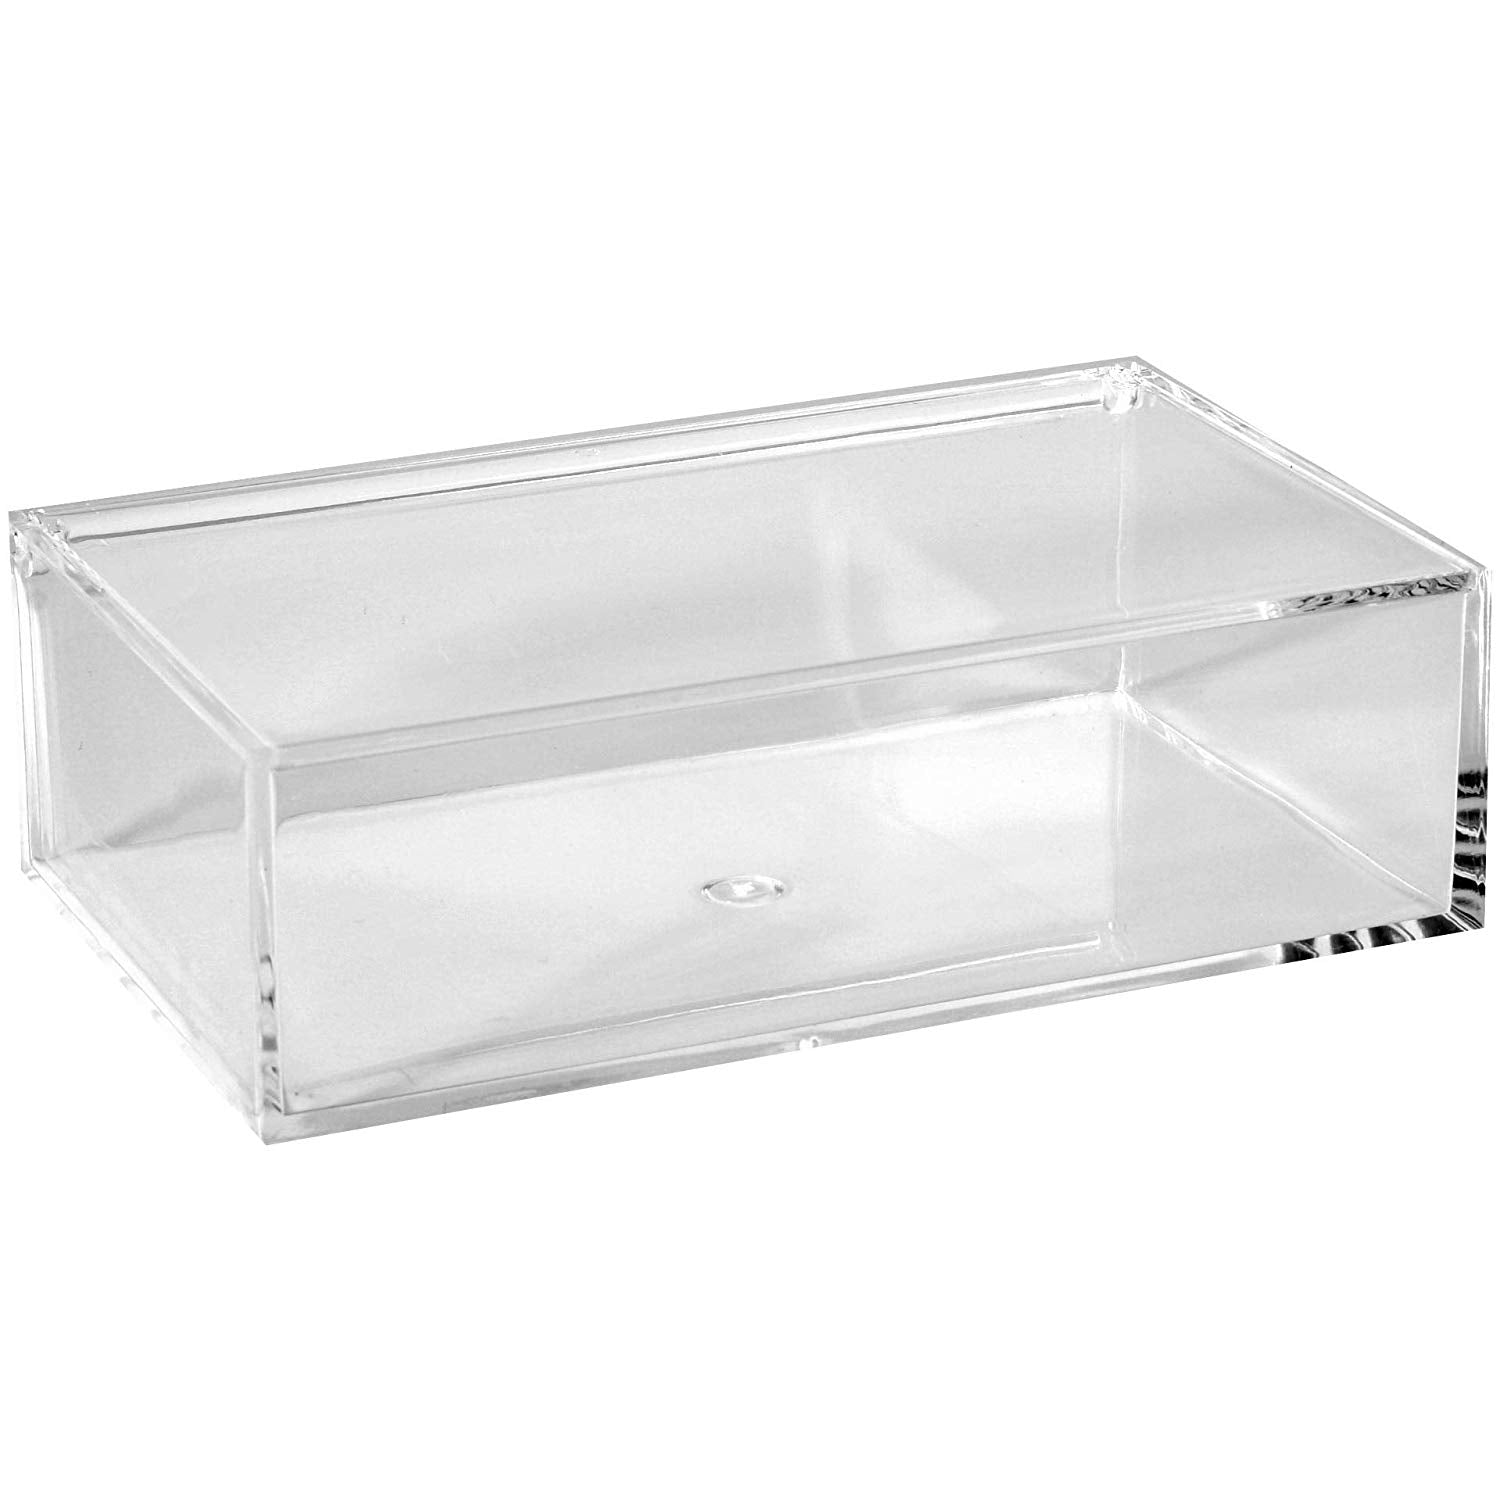  Hammont Clear Acrylic Boxes - 2 Pack - 4''x4''x4'' - Small Cube  Lucite Boxes for Gifts, Weddings, Party Favors, Treats, Candies &  Accessories, Plastic Storage Boxes : Home & Kitchen